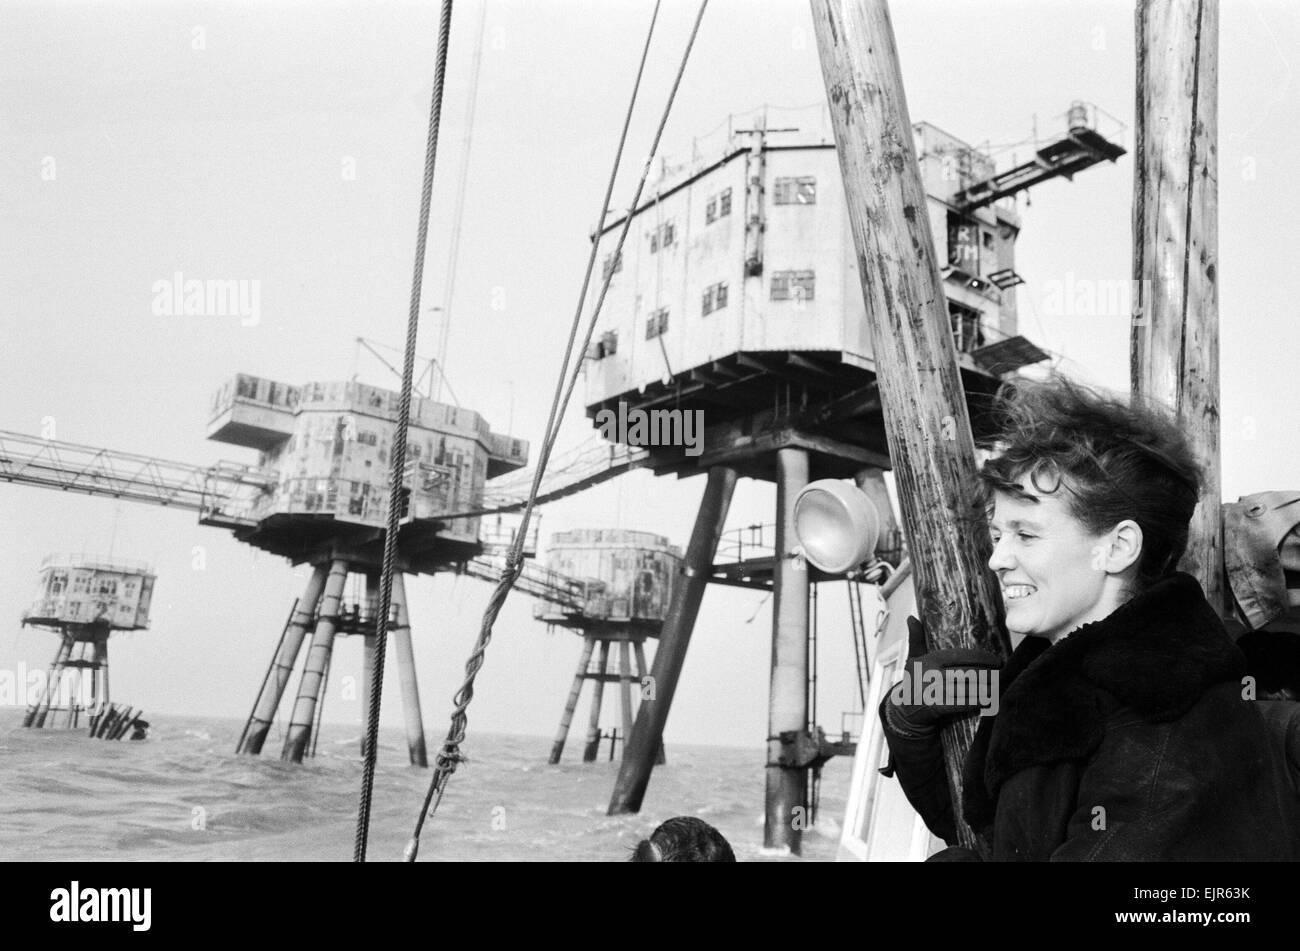 Dorothy Calvert widow of Reg Calvert, arriving at home of pirate radio station Radio City at Shivering Sands Fort in the Thames Estuary 15th February 1967. Possibly for the last time, as she was recently fined £100 for broadcating illegally & may have to shut down the broadcasting station. Stock Photo